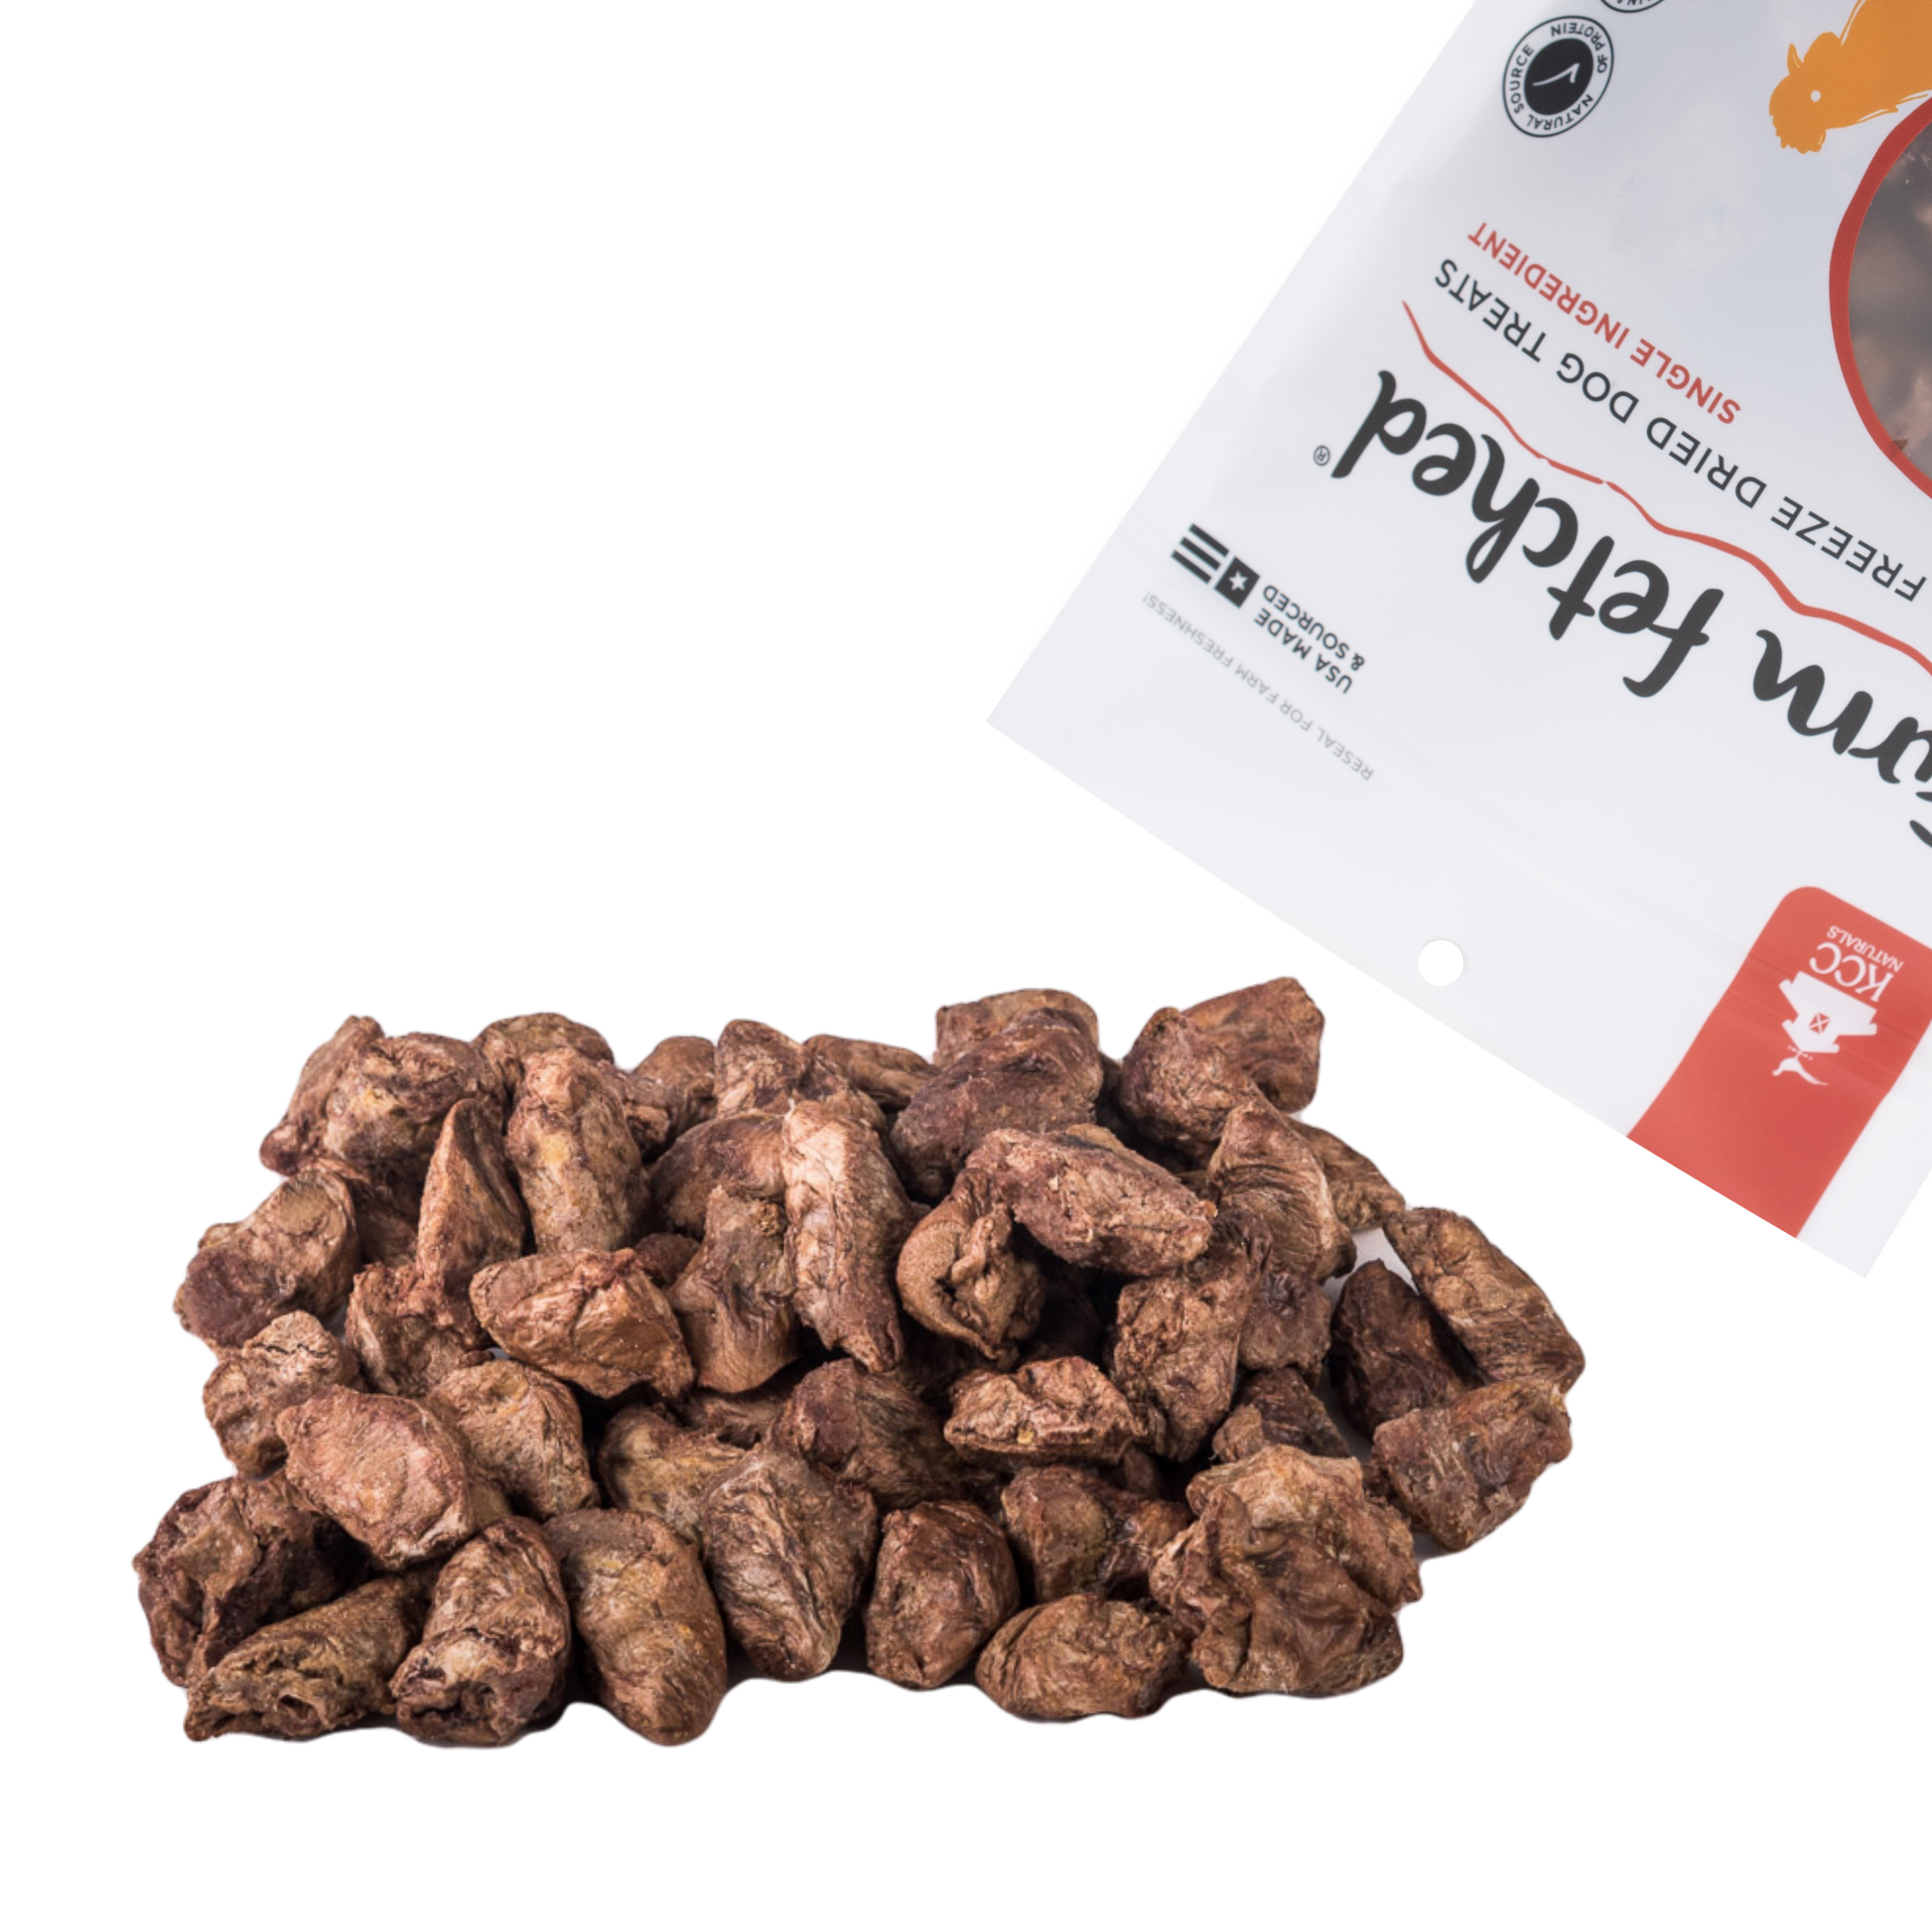 Chicken Heart dog product pouring out of package